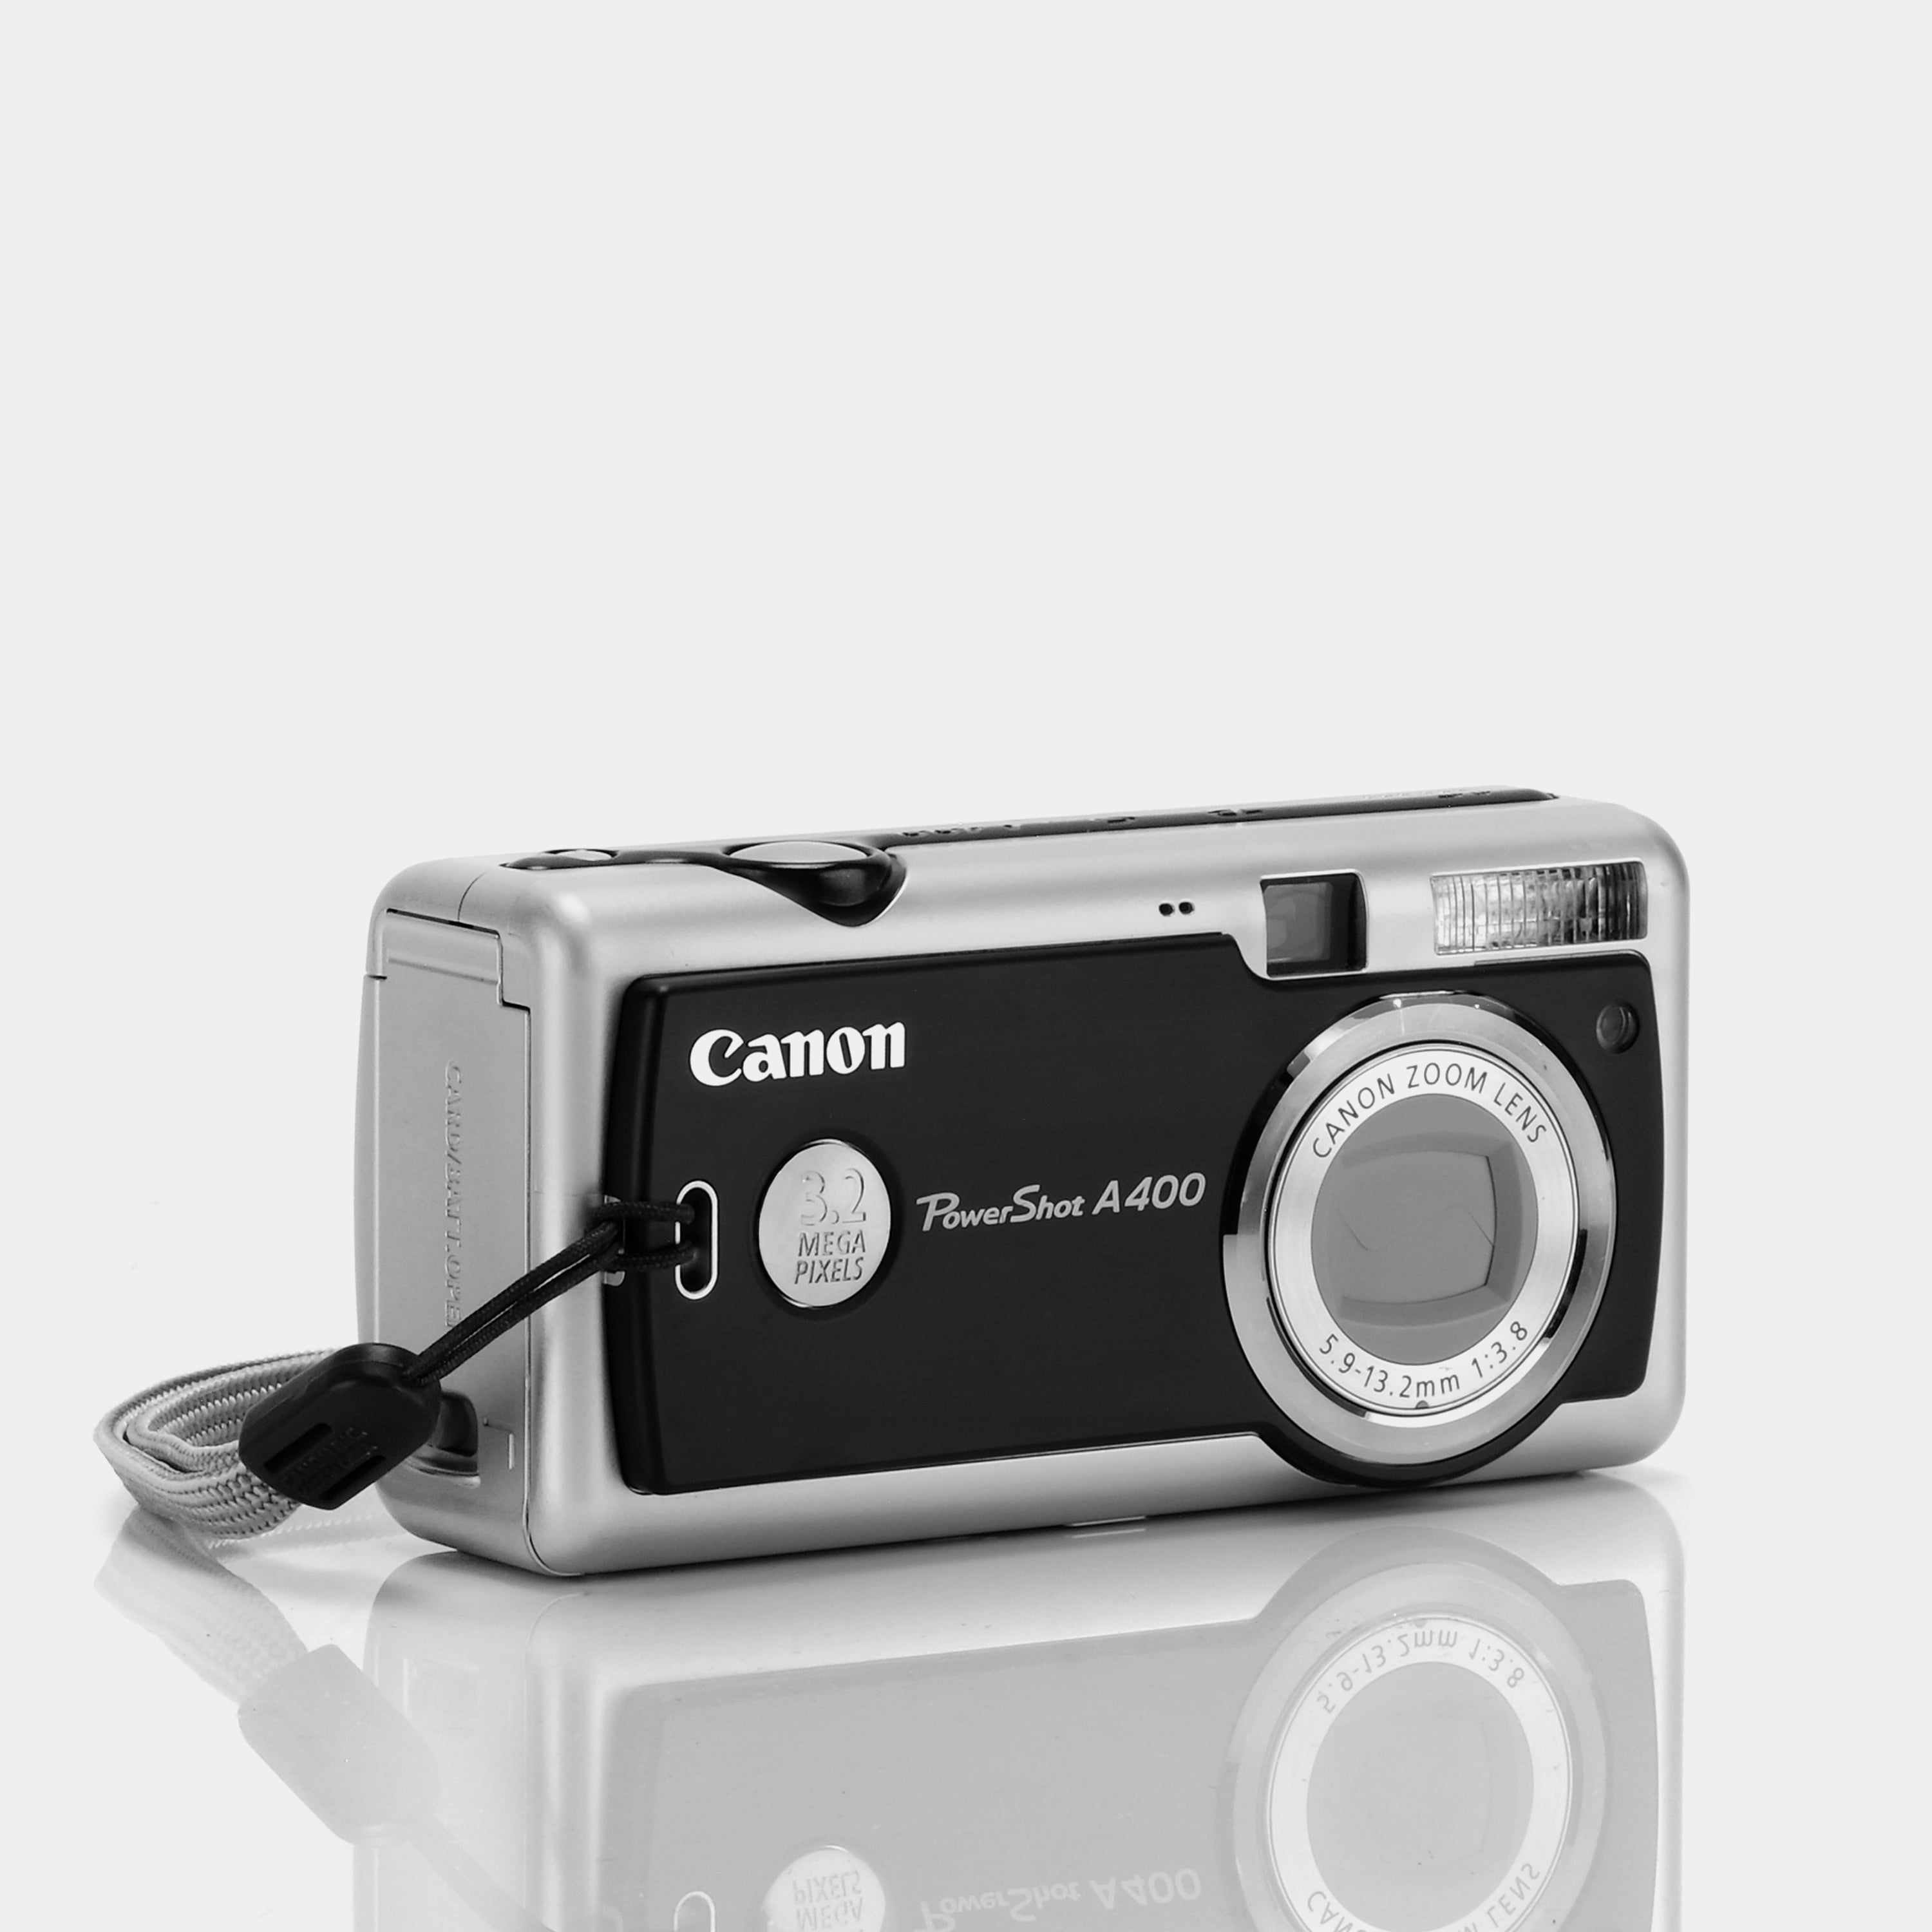 Canon PowerShot A400 Point and Shoot Digital Camera